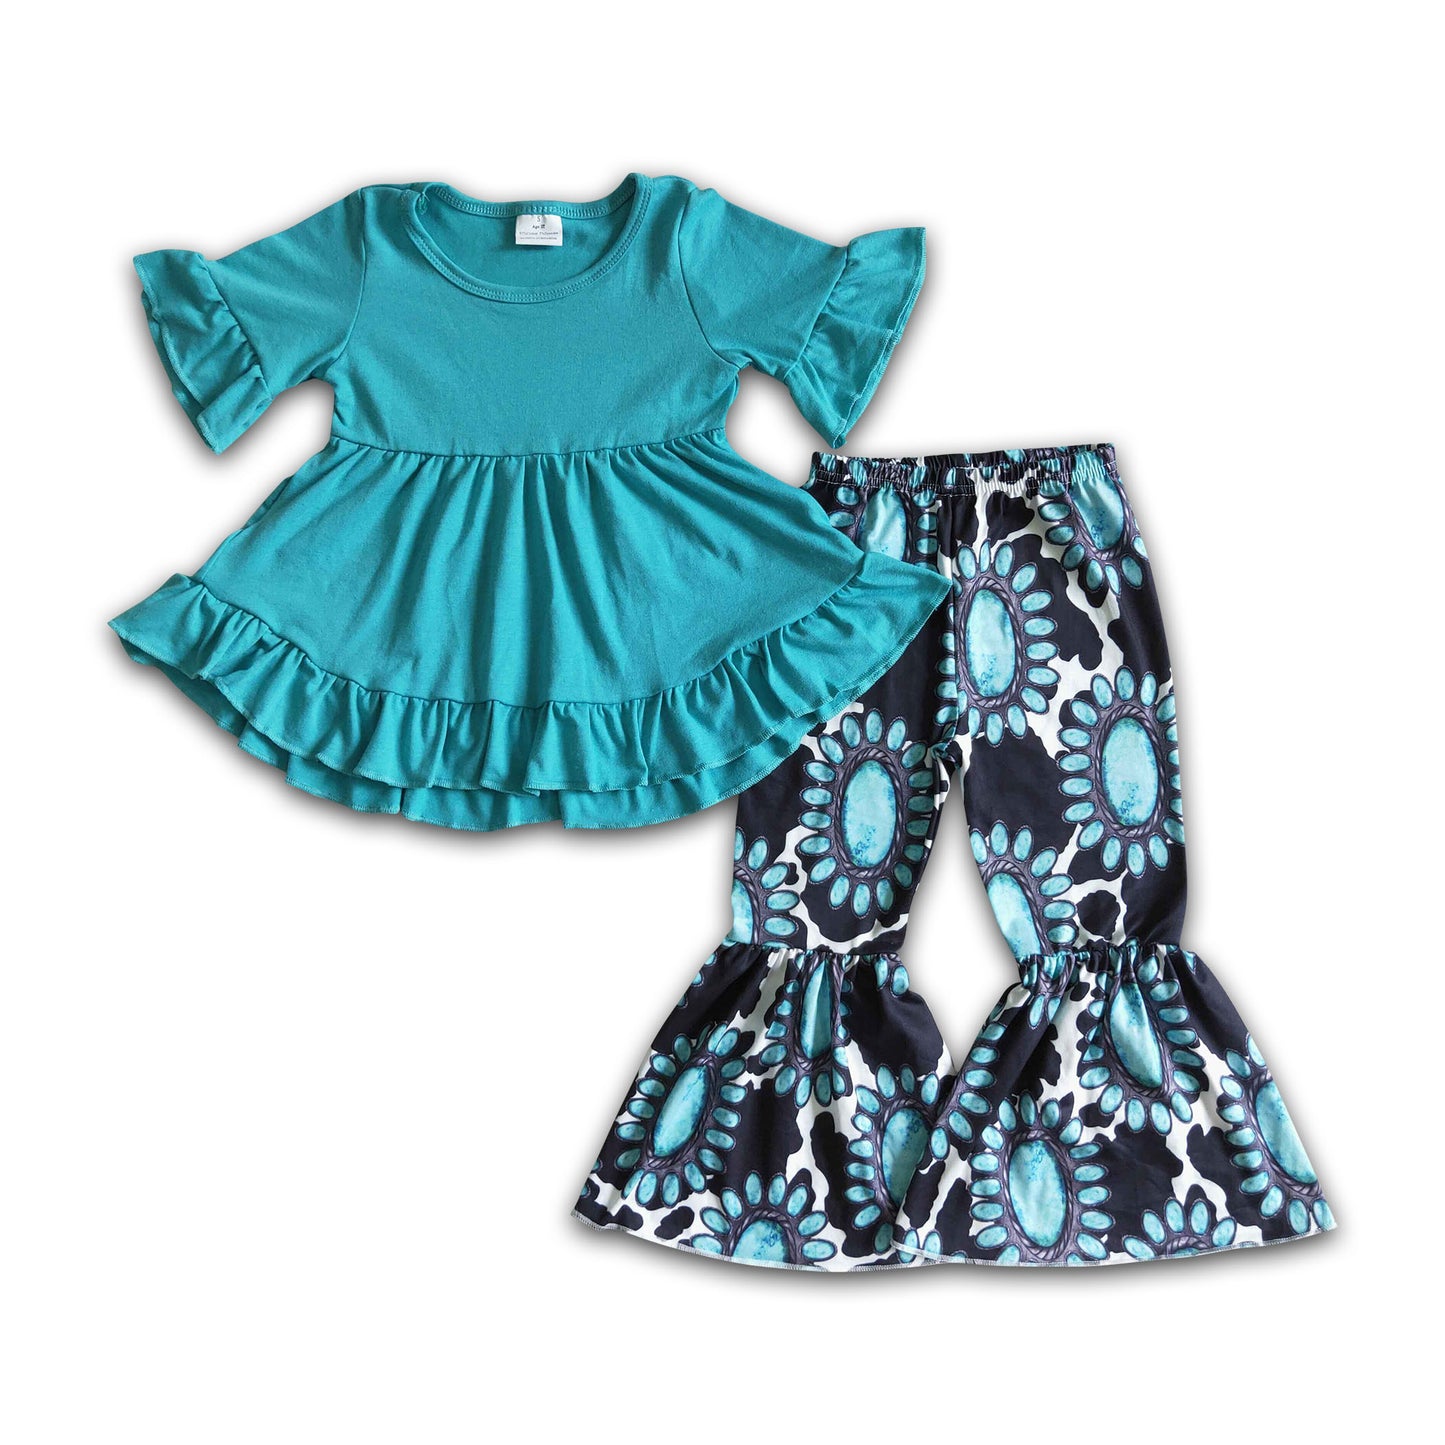 Turquoise tunic bell bottom pants girls western clothes